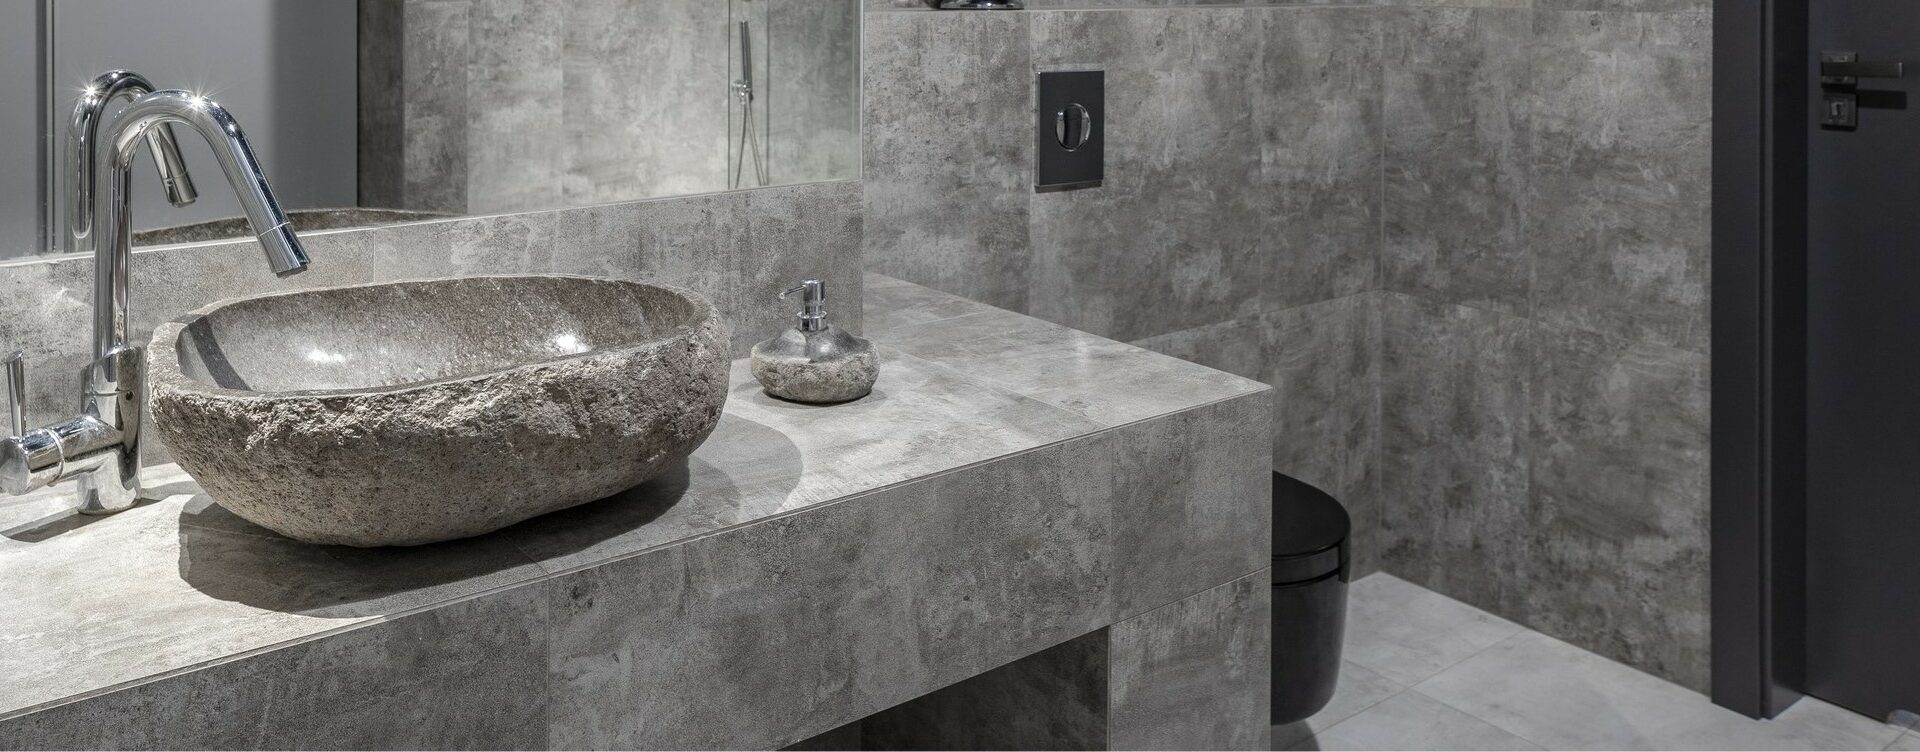 Natural Stone Wall Tile In A Contemporary Ensuite Bathroom